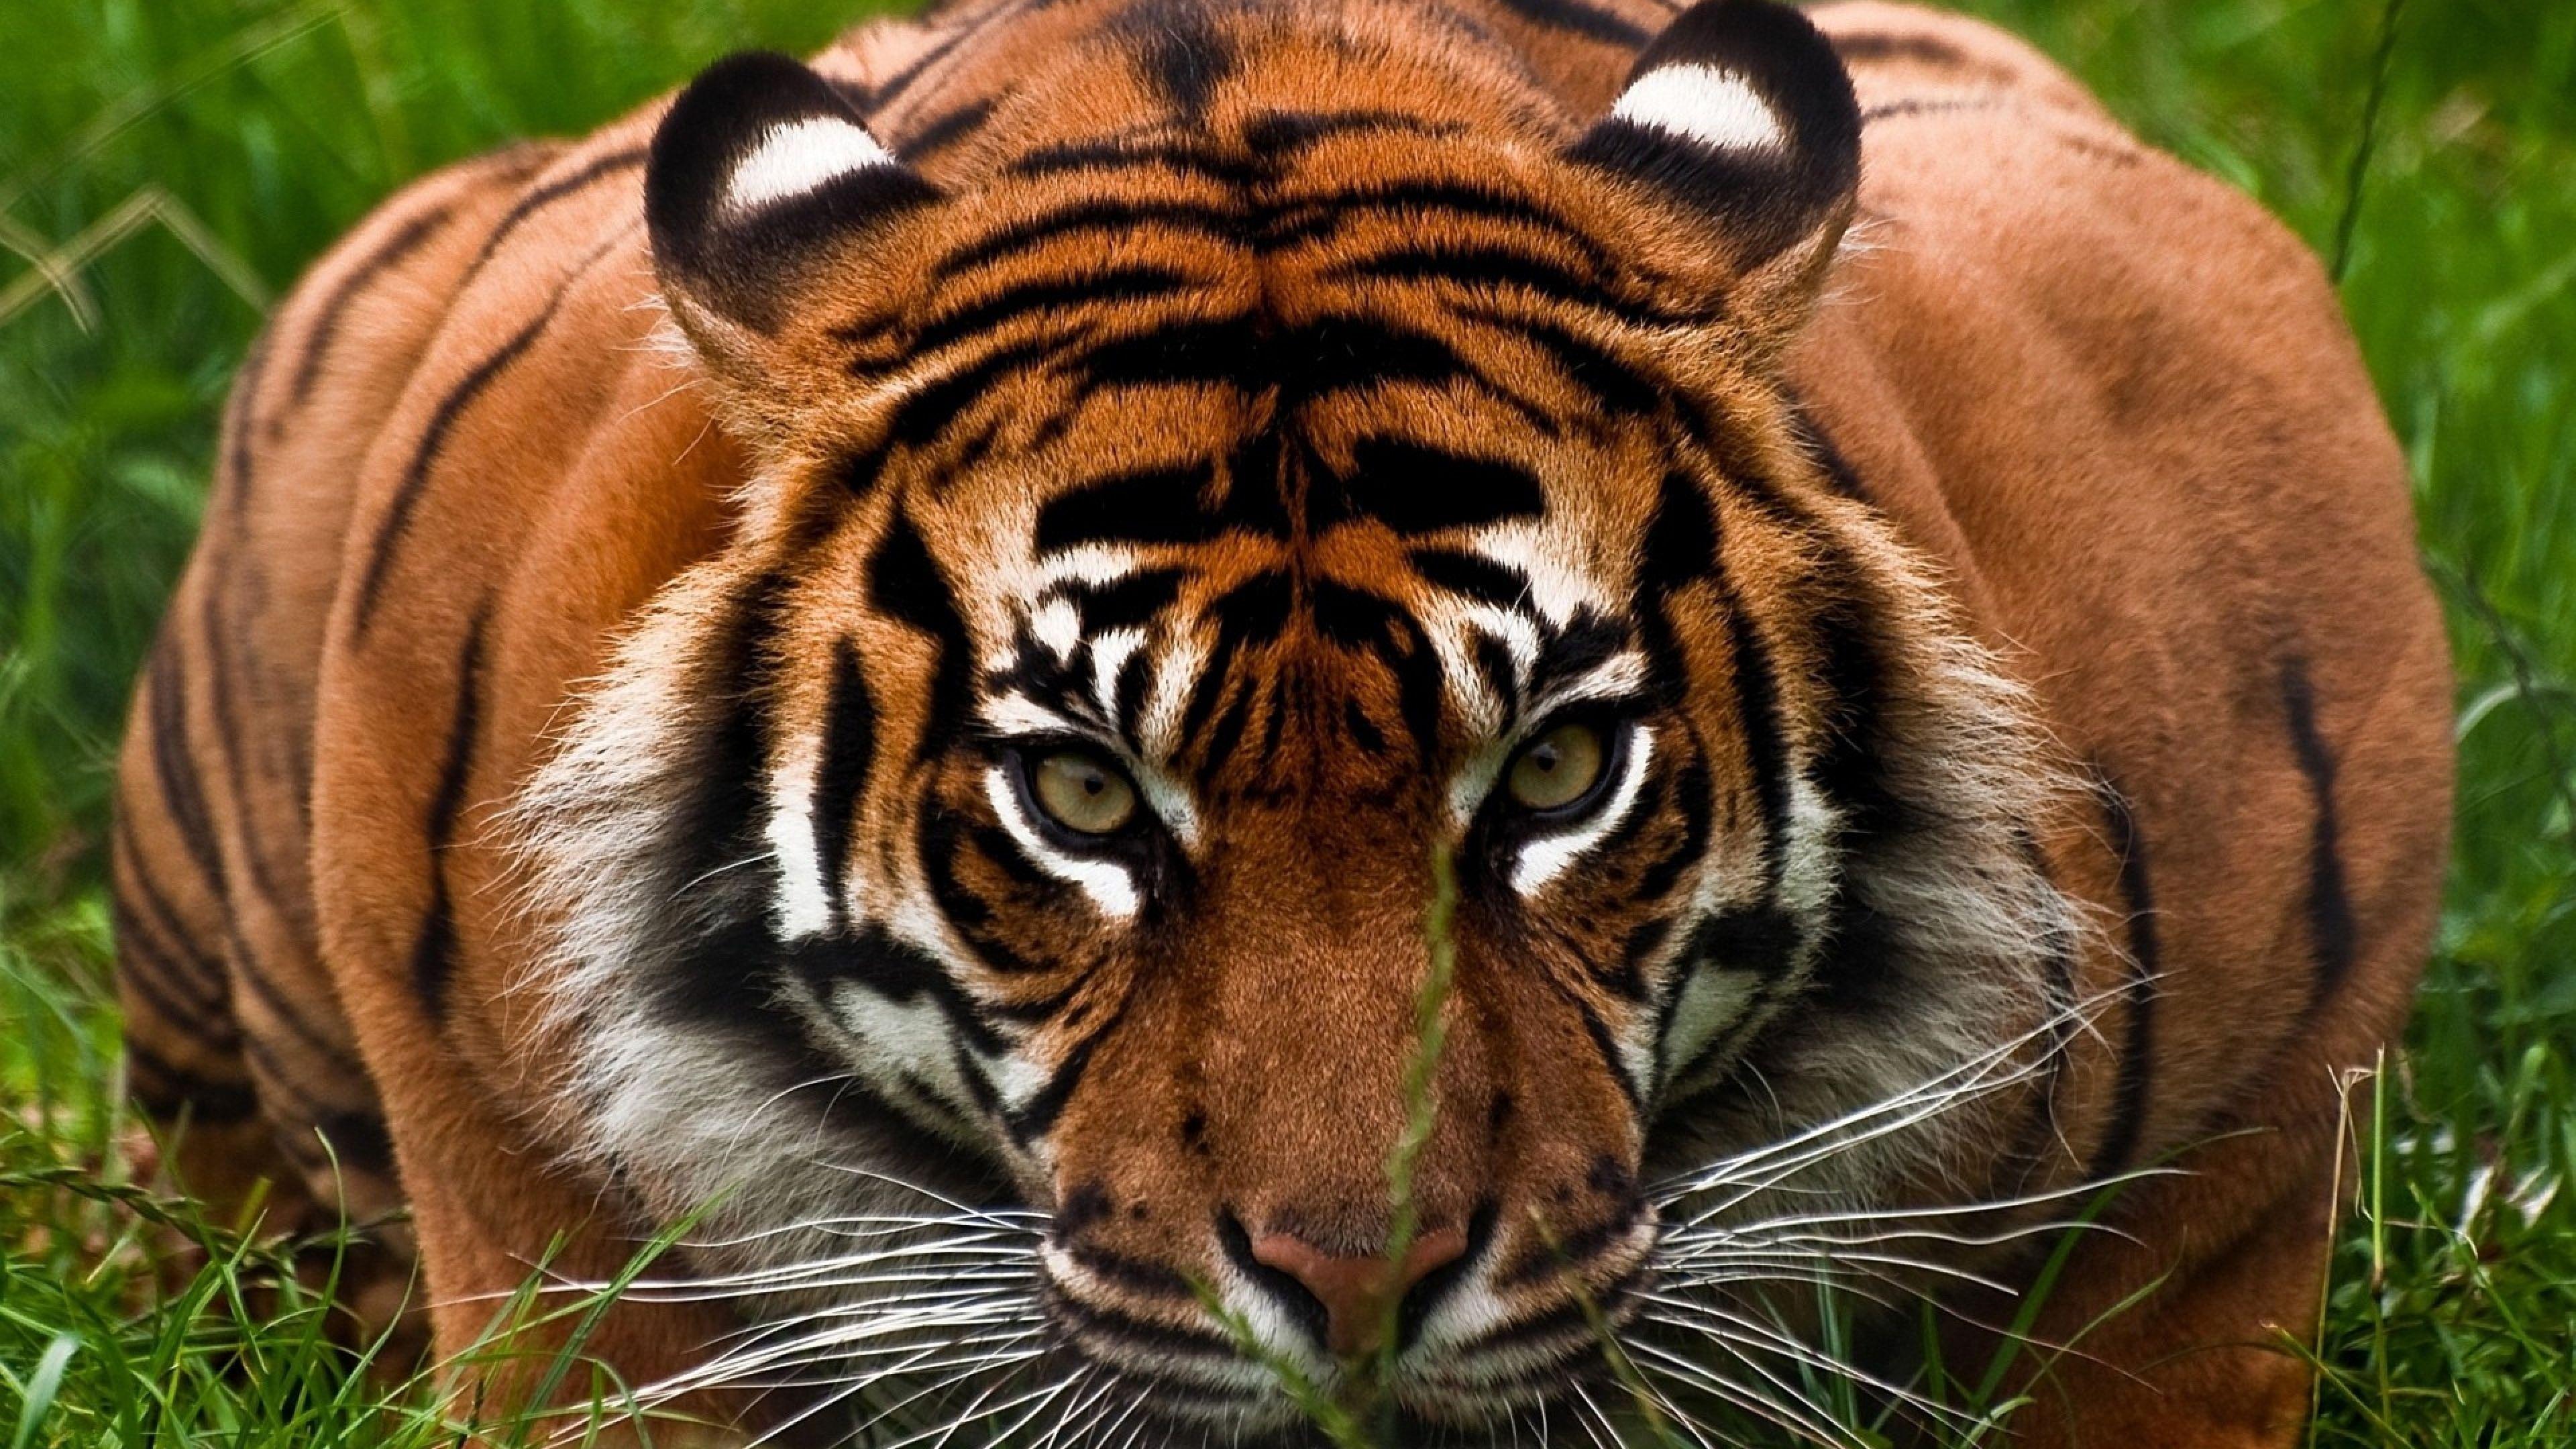 Tiger face Wallpapers Download | MobCup